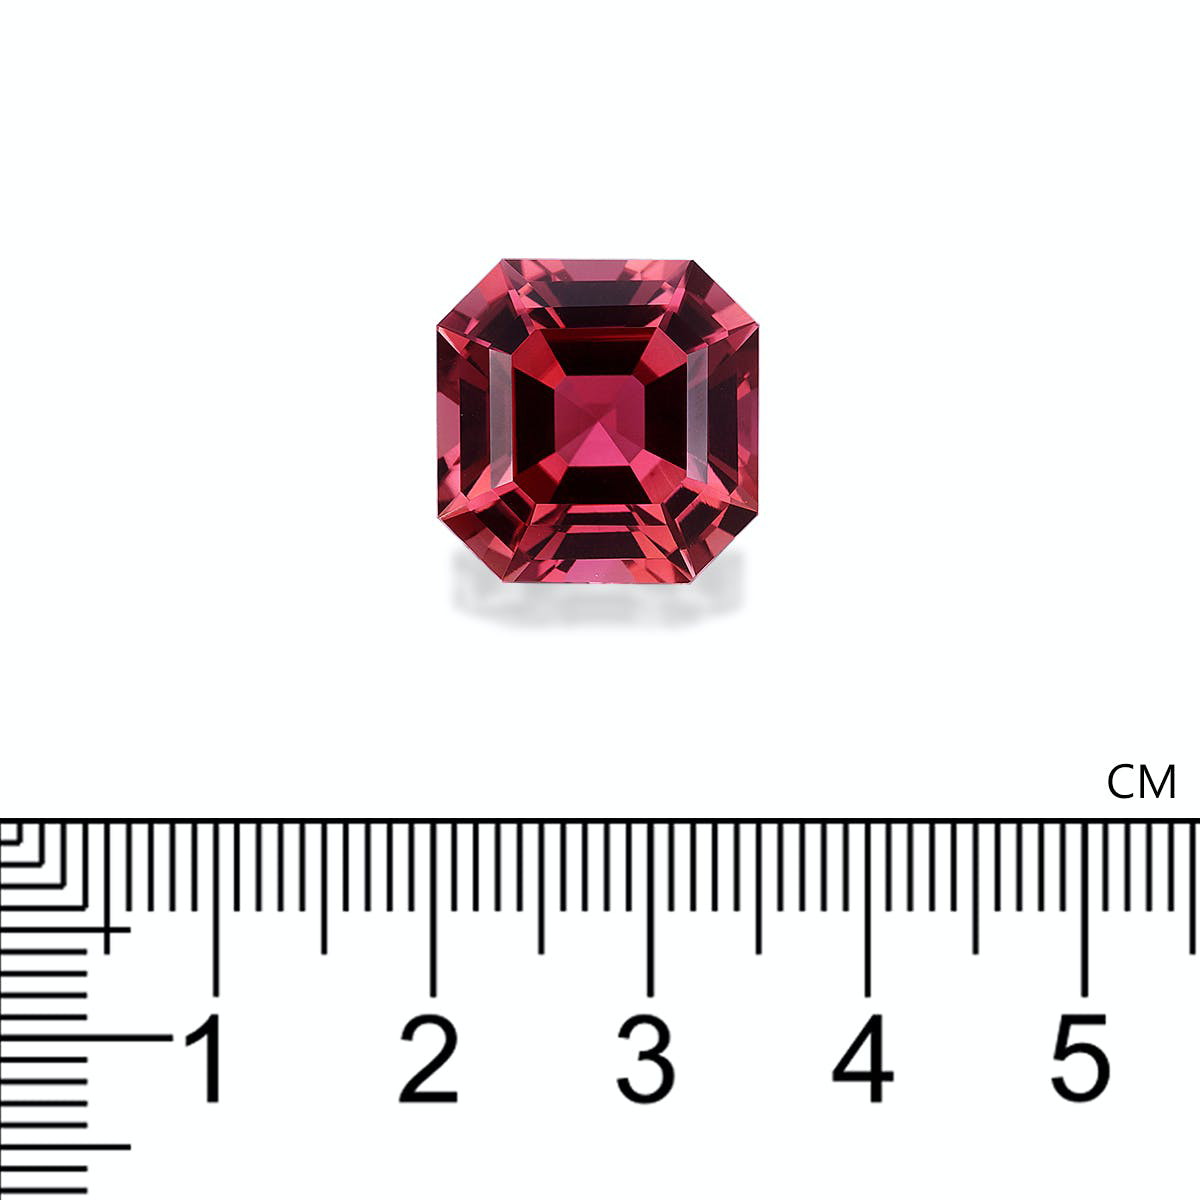 Picture of Strawberry Pink Tourmaline 15.84ct - 15mm (PT1032)